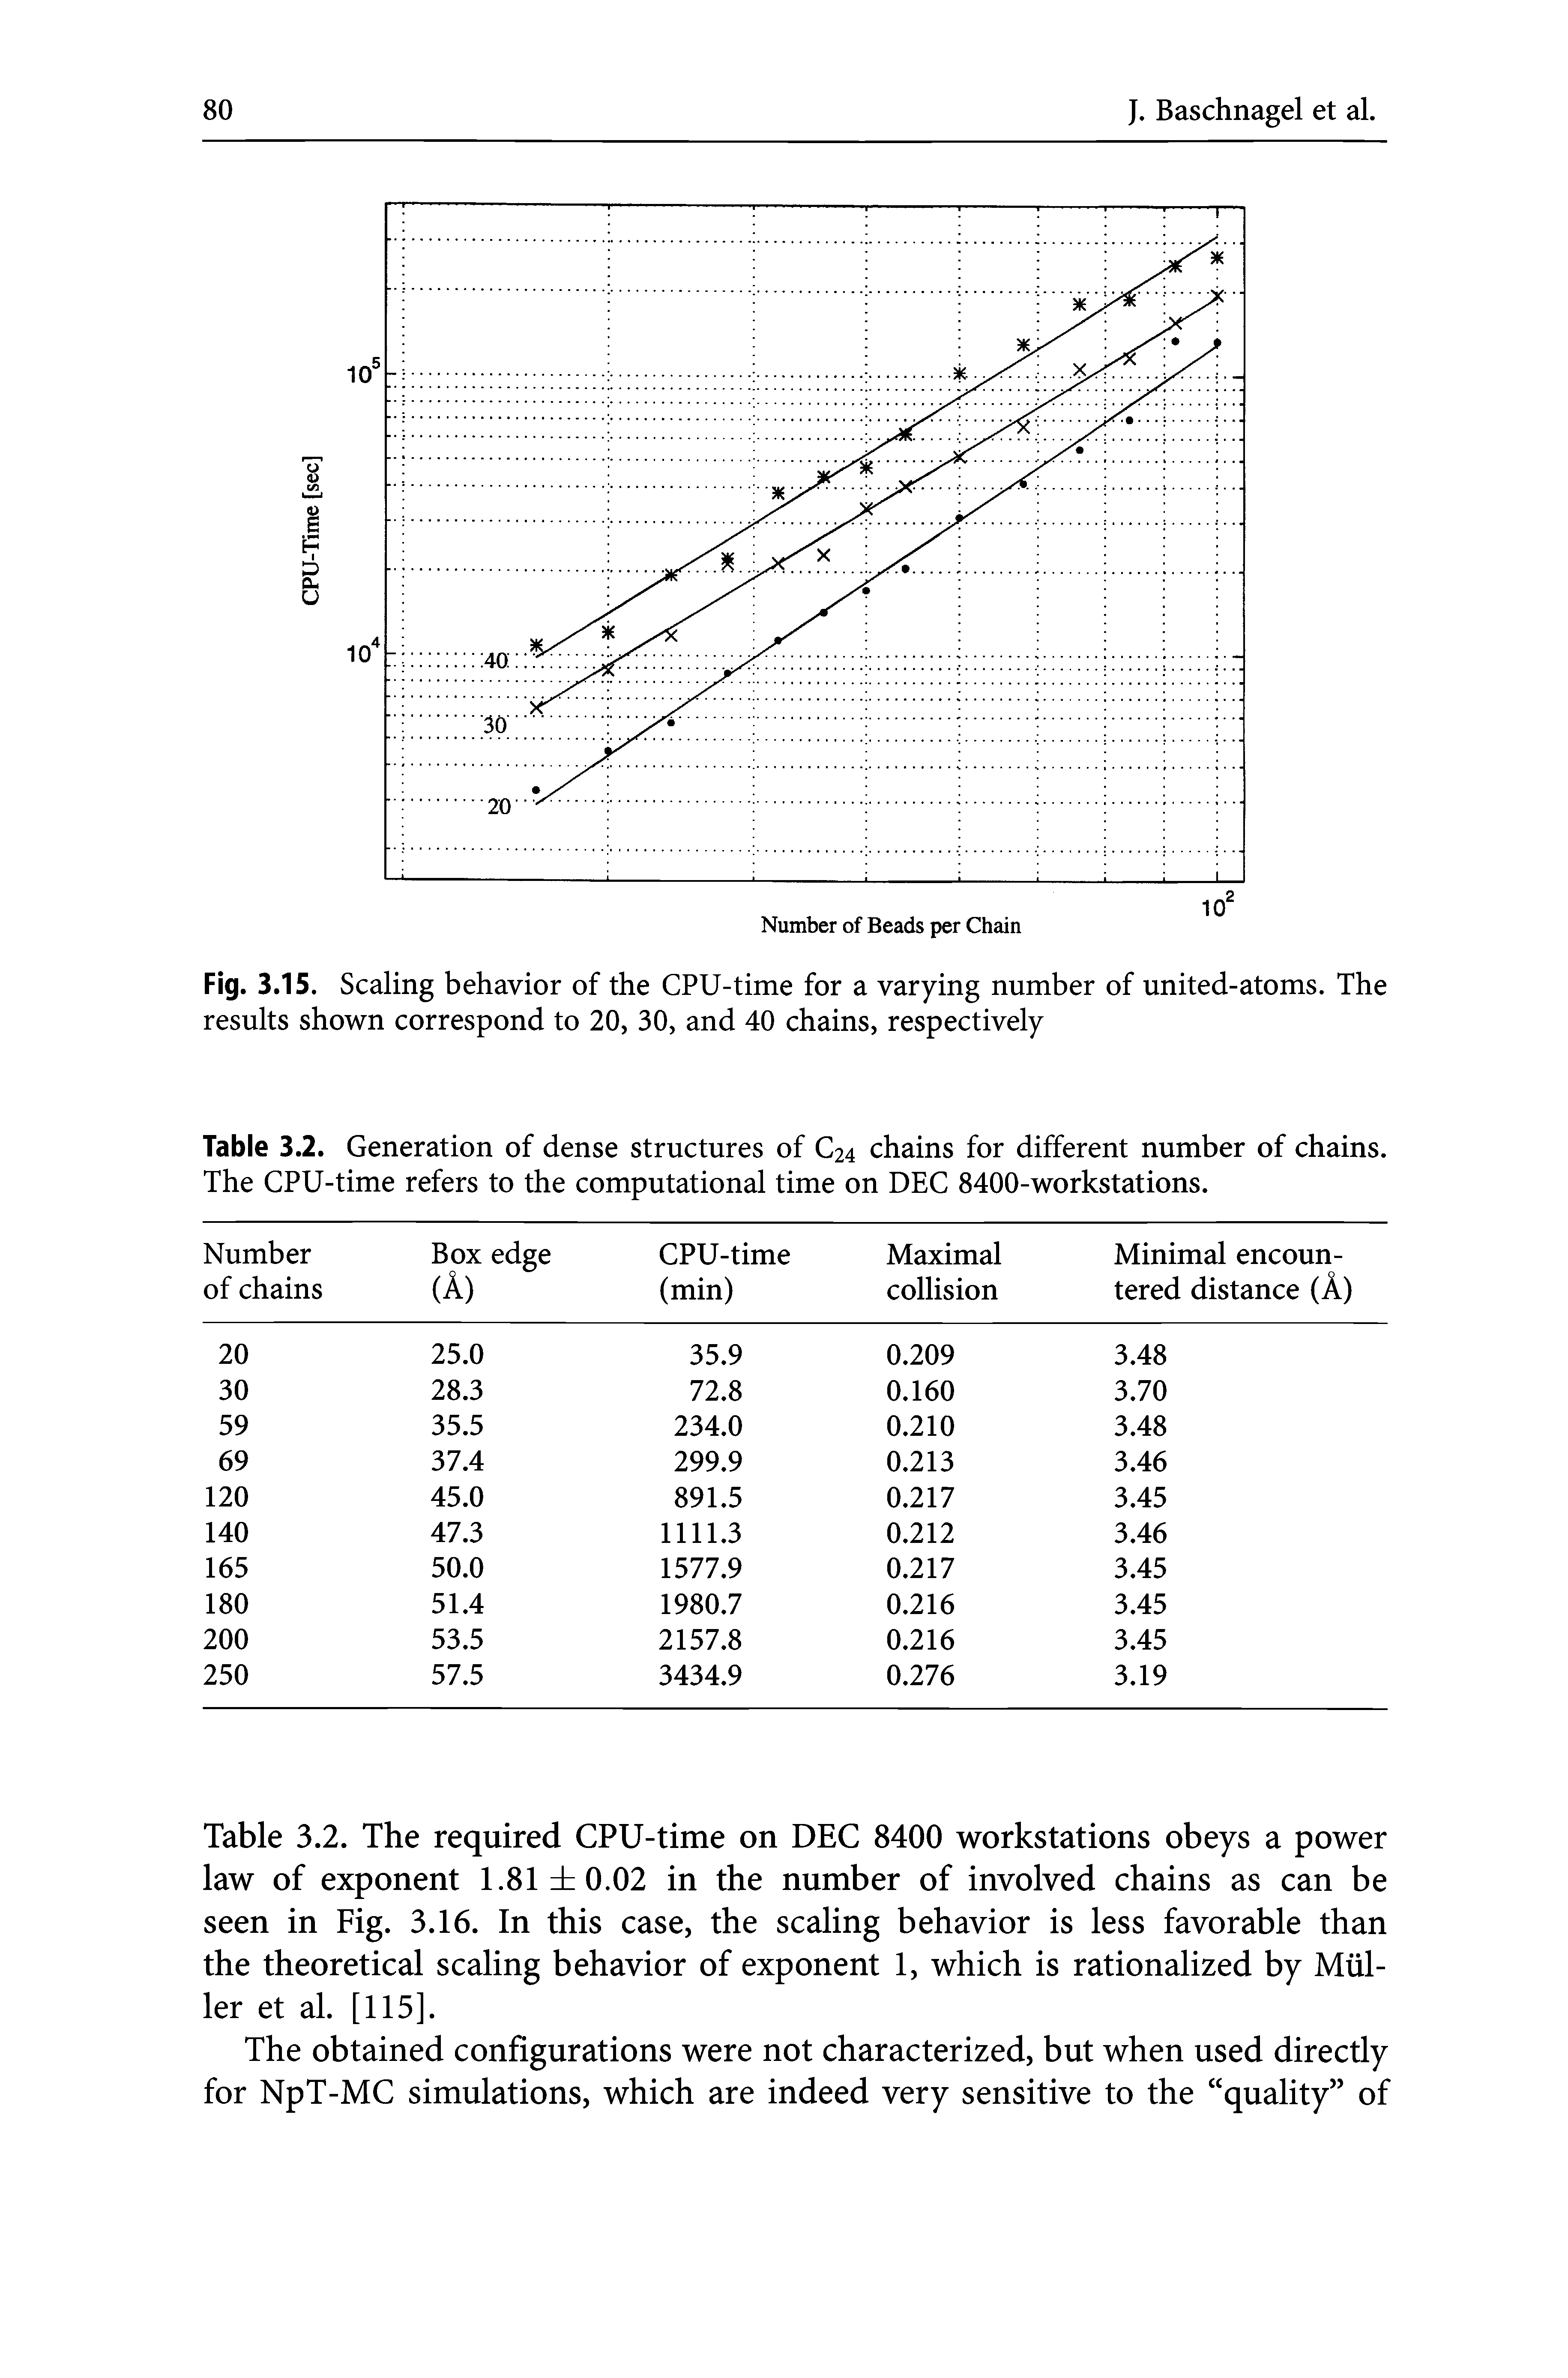 Table 3.2. The required CPU-time on DEC 8400 workstations obeys a power law of exponent 1.81 0.02 in the number of involved chains as can be seen in Fig. 3.16. In this case, the scaling behavior is less favorable than the theoretical scaling behavior of exponent 1, which is rationalized by Muller et al. [115].